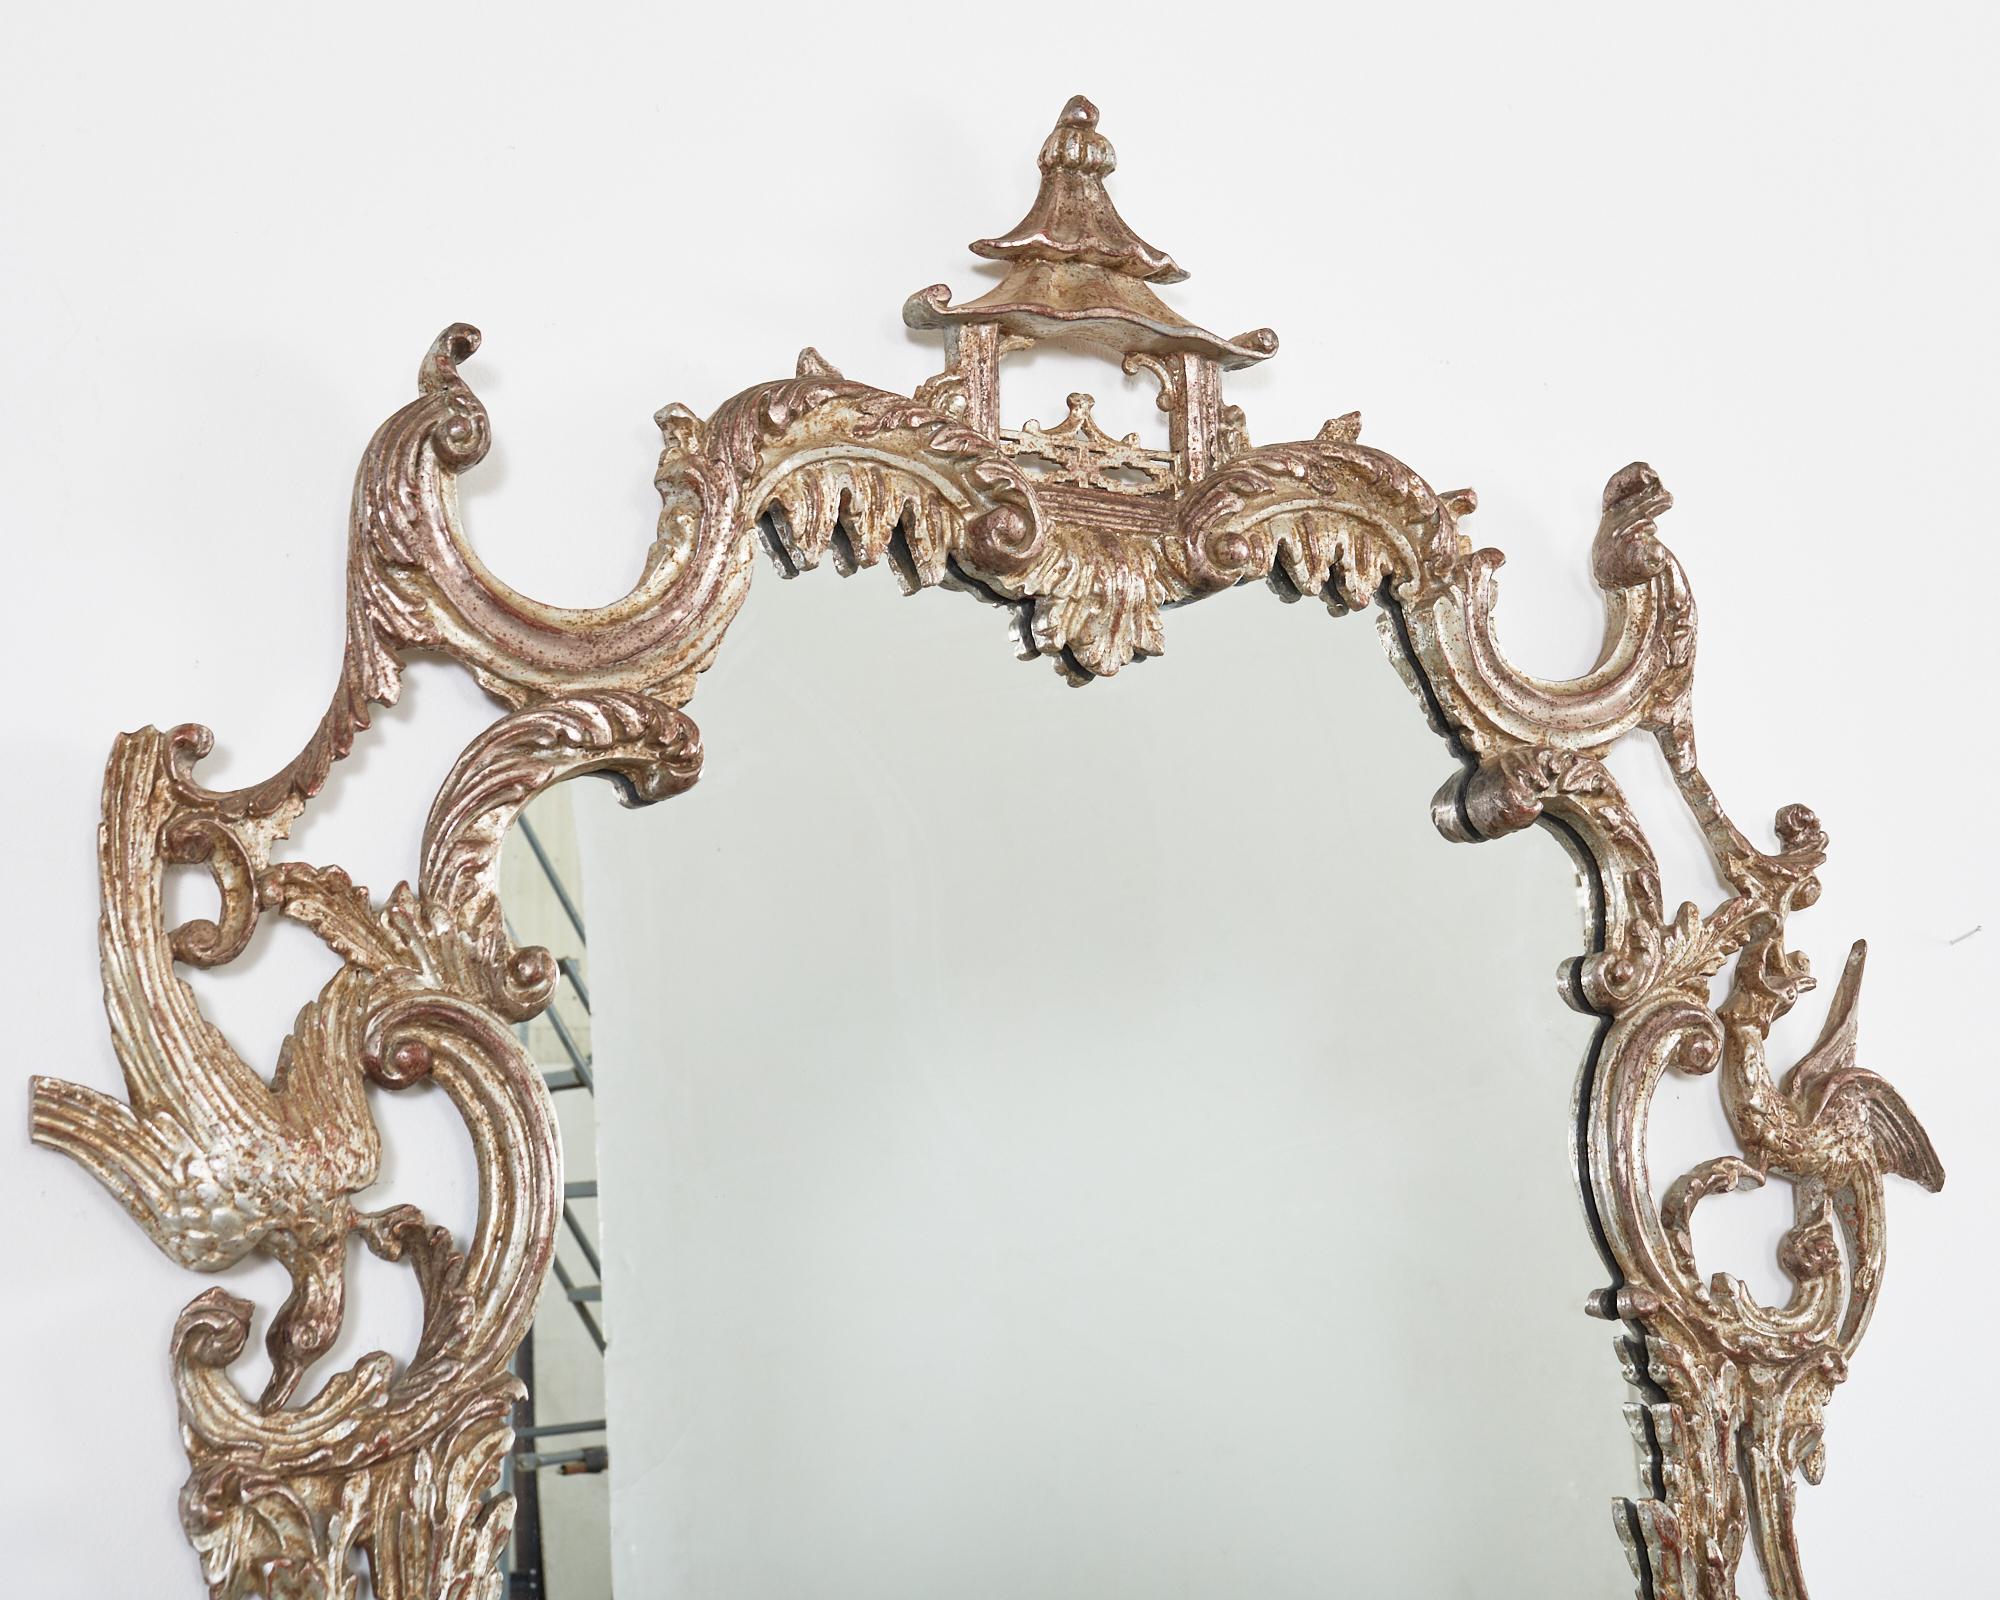 20th Century Chinese Chippendale Style Silver Gilt Pagoda Mirror with HoHo Birds For Sale